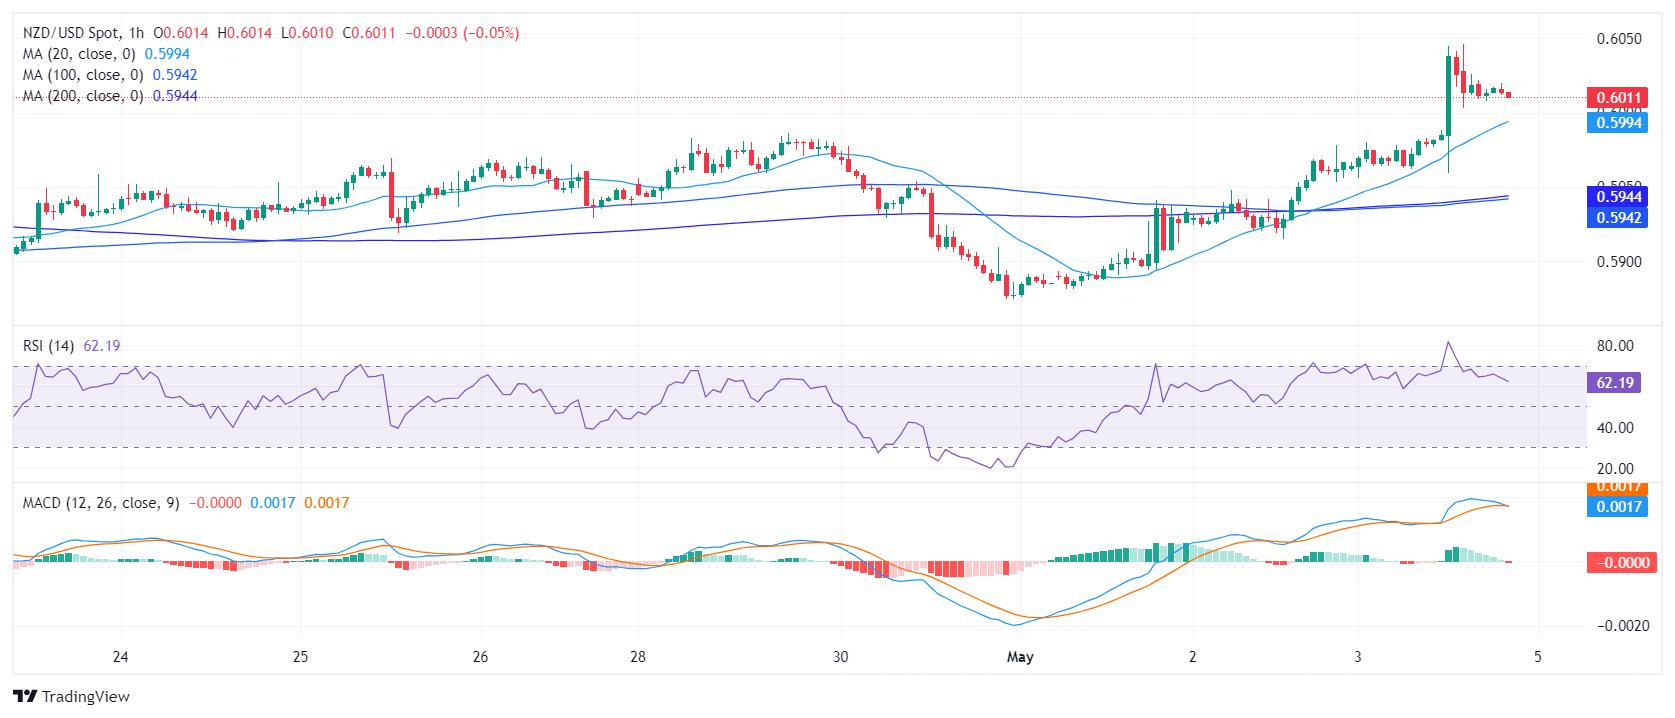 NZD/USD Price Analysis: Bullish momentum picks up, buyers rejected at the 100-day SMA